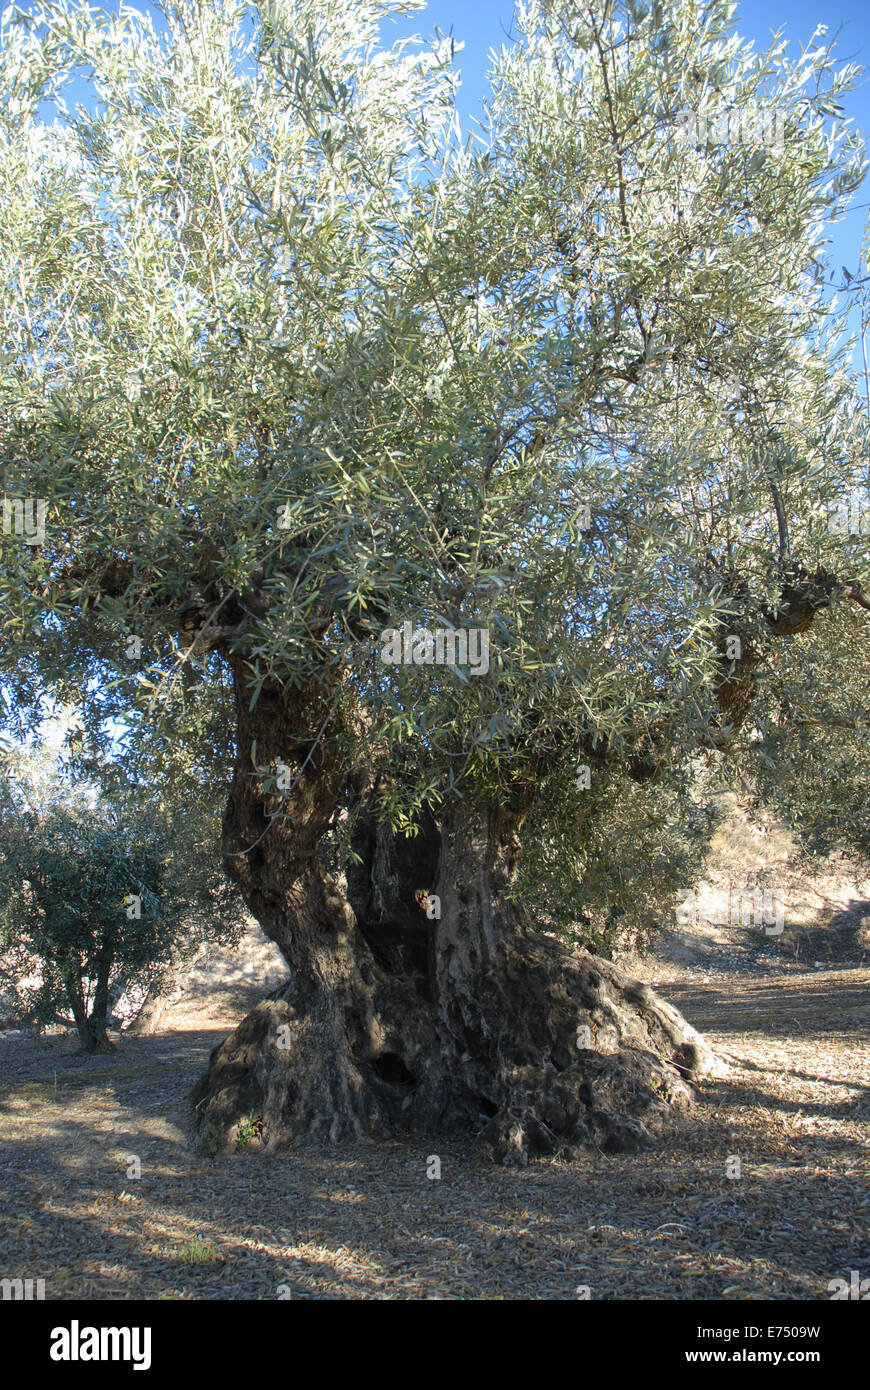 Very old olive tree, Spain Stock Photo